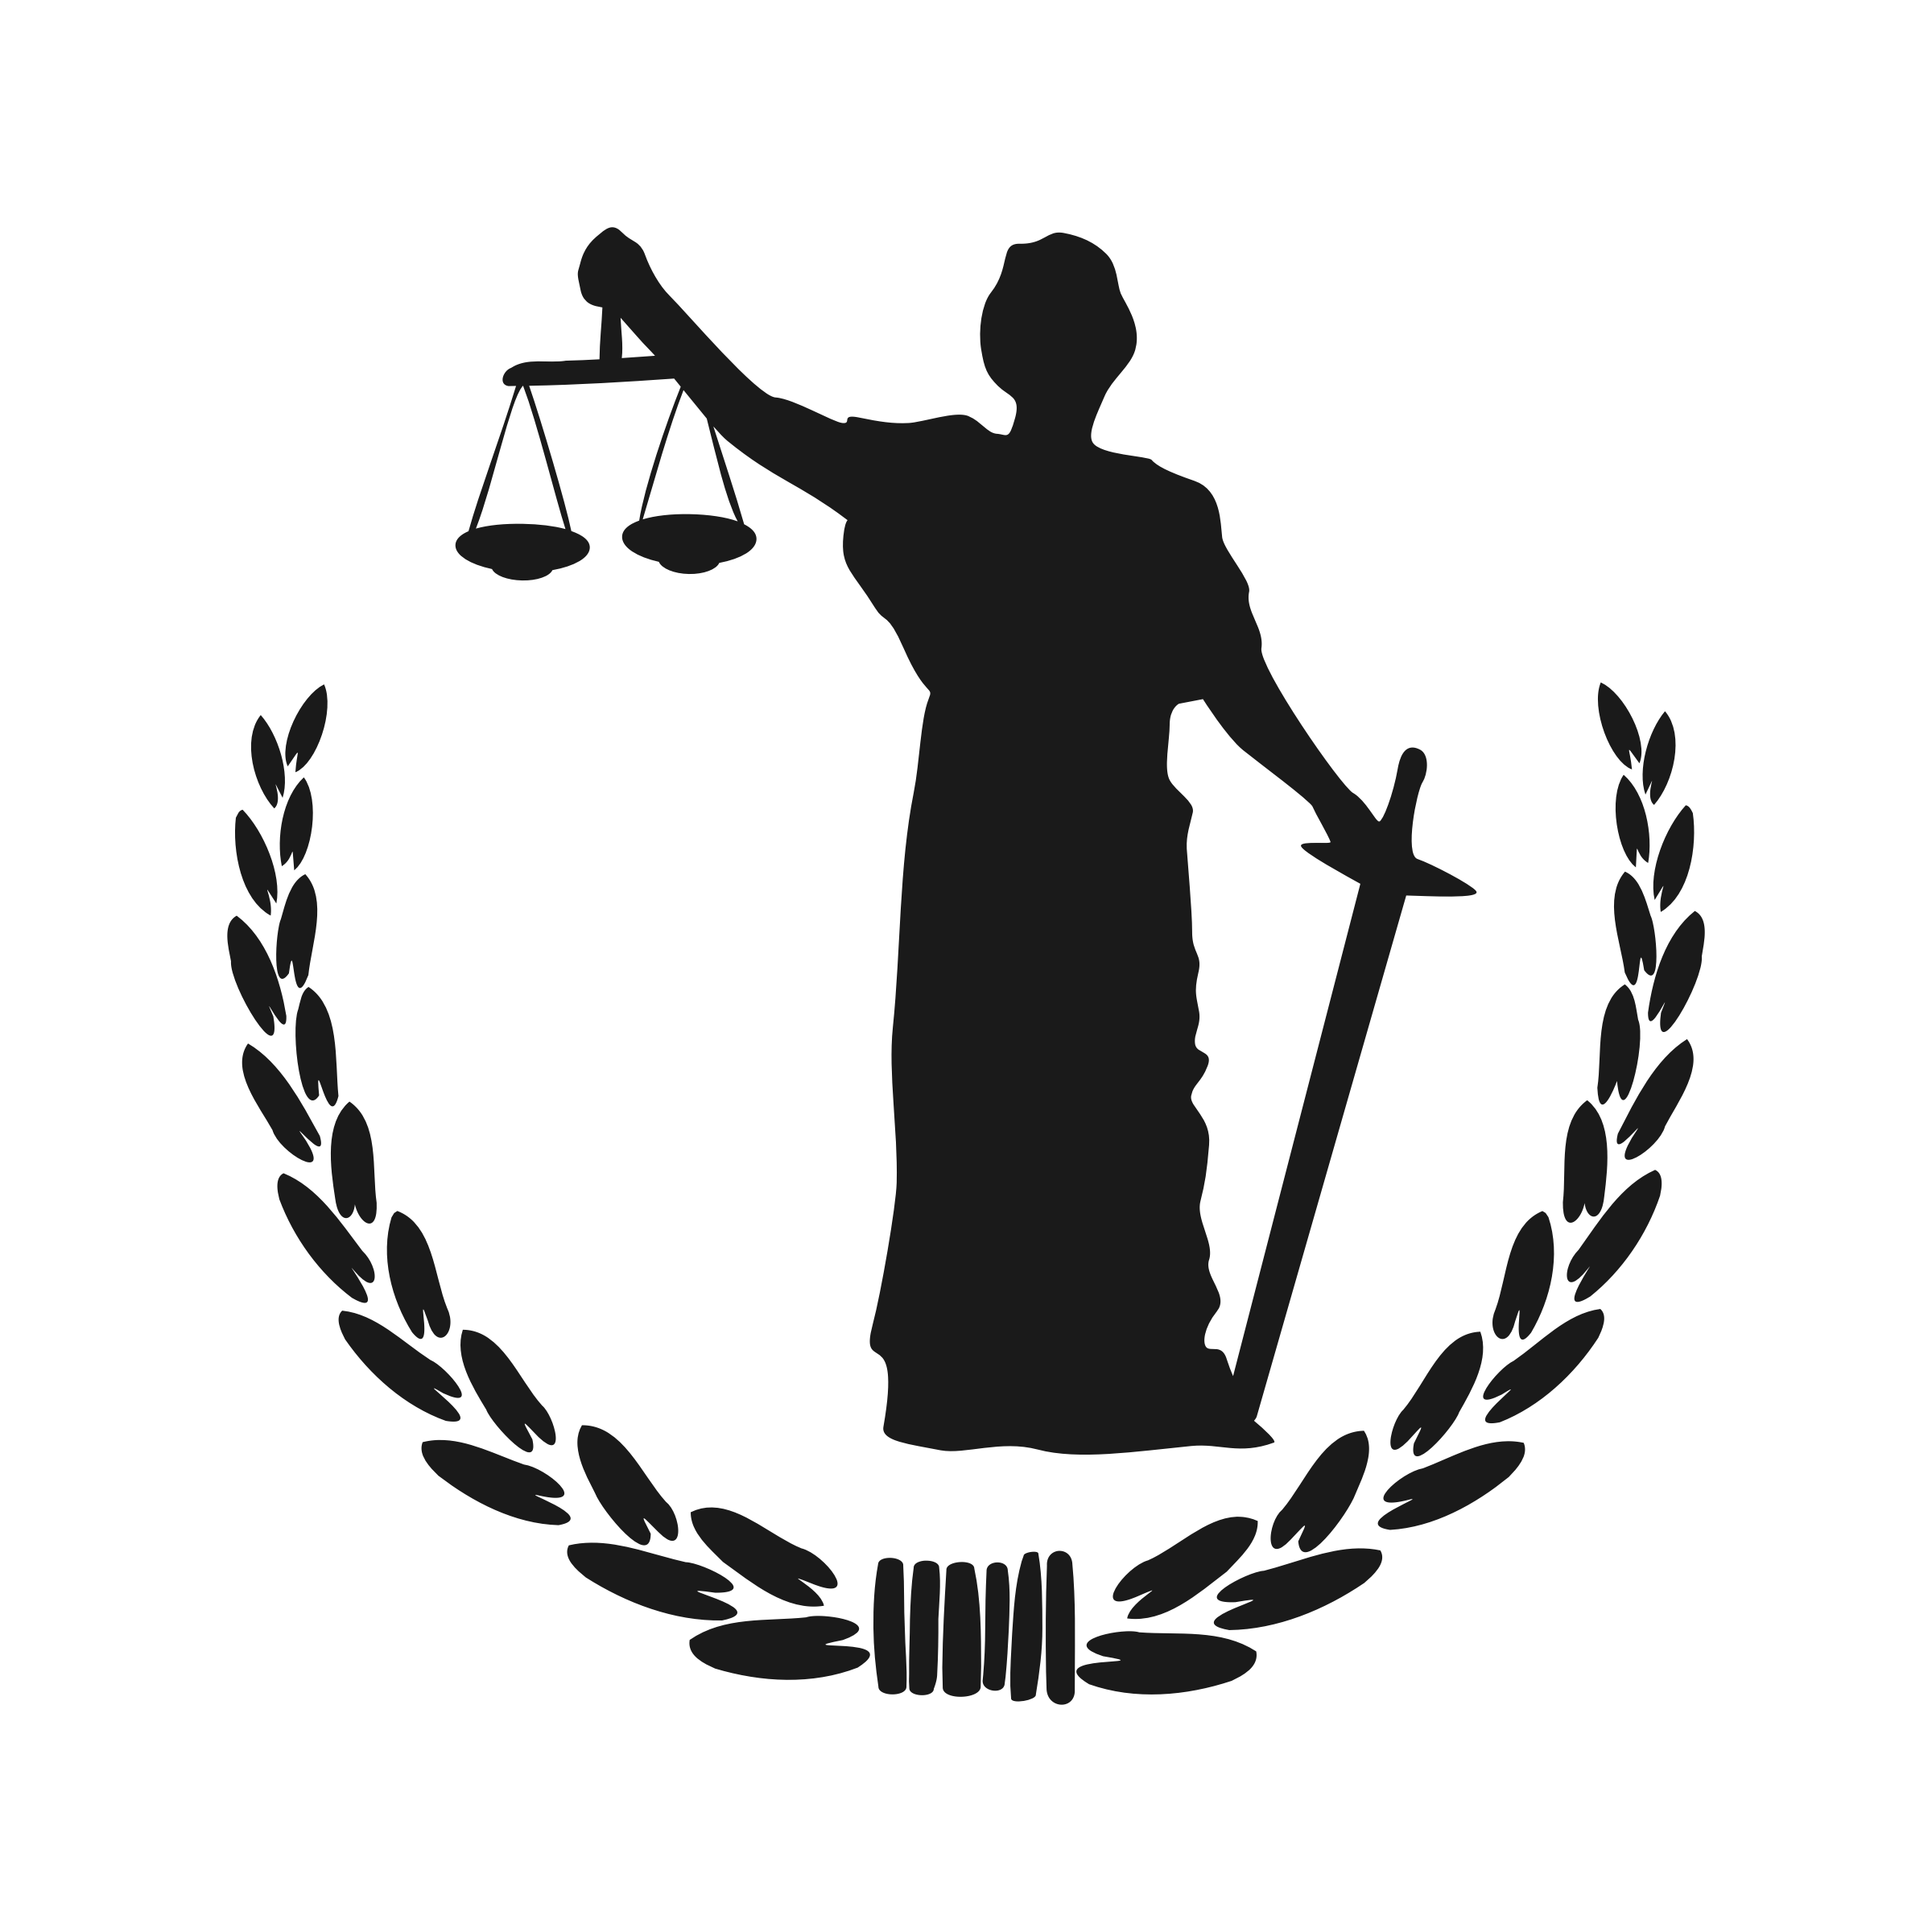 Justice clipart clipartall 6